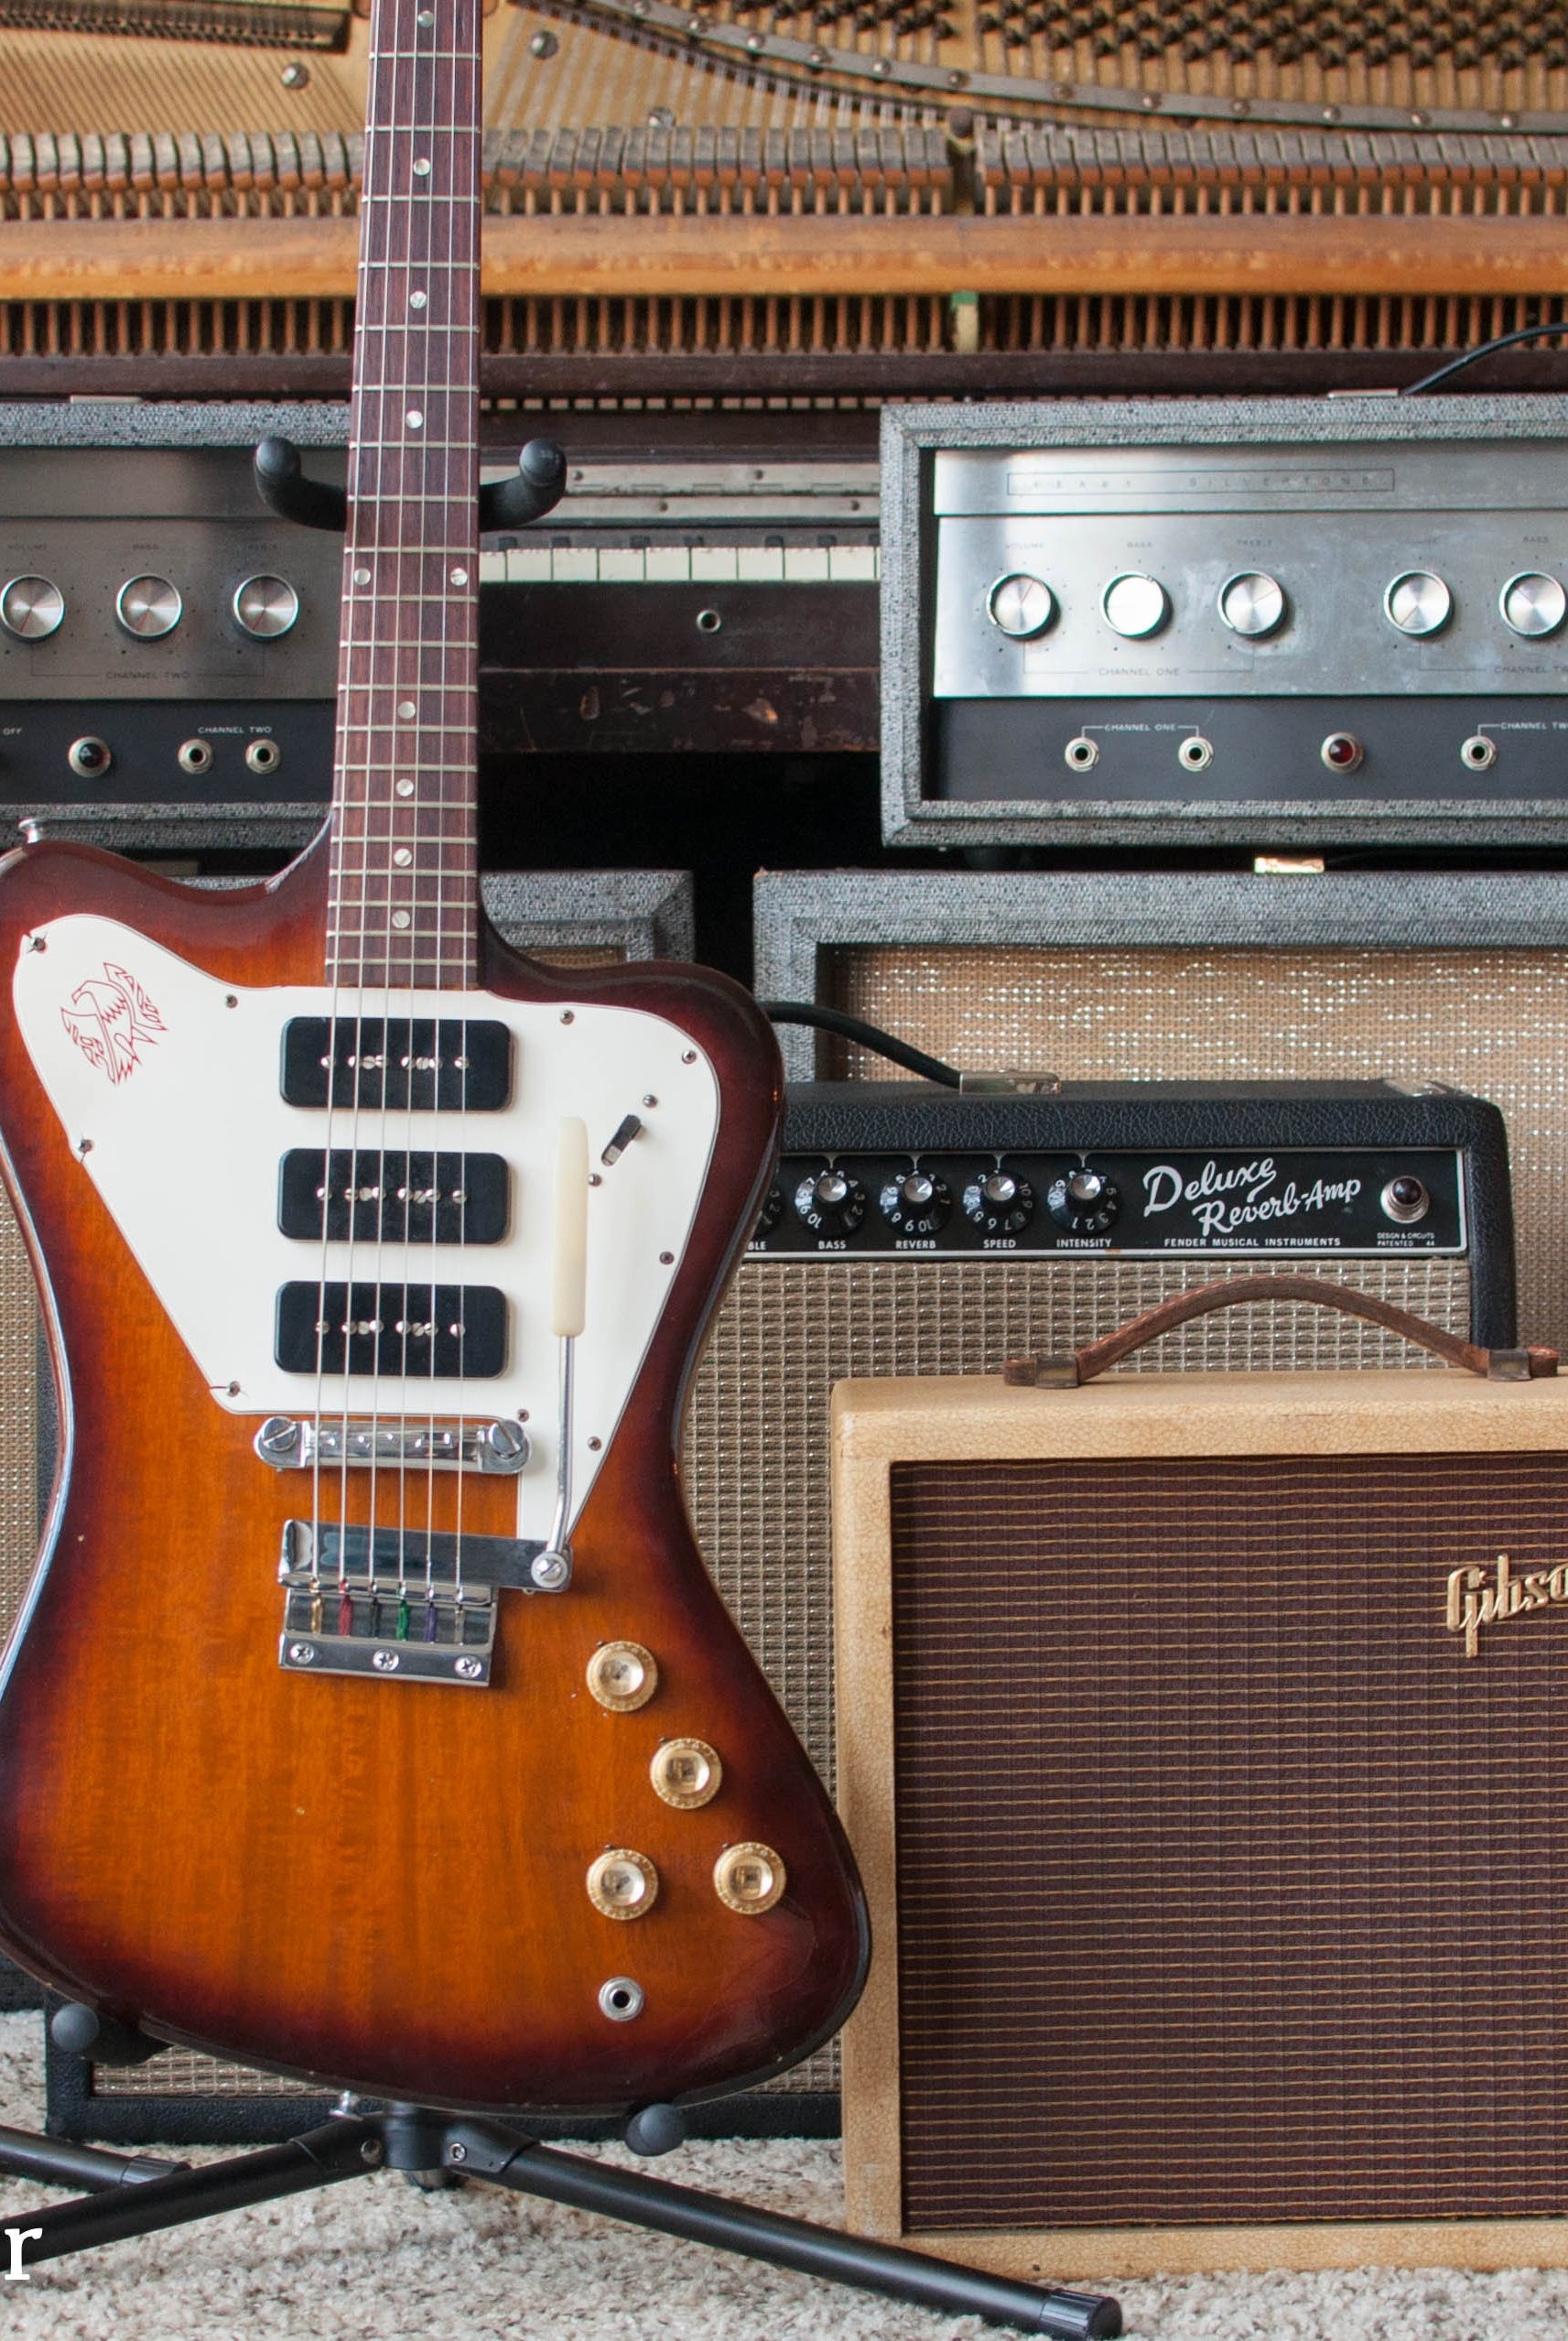 Consign your vintage guitar or amplifier with True Vintage Guitar